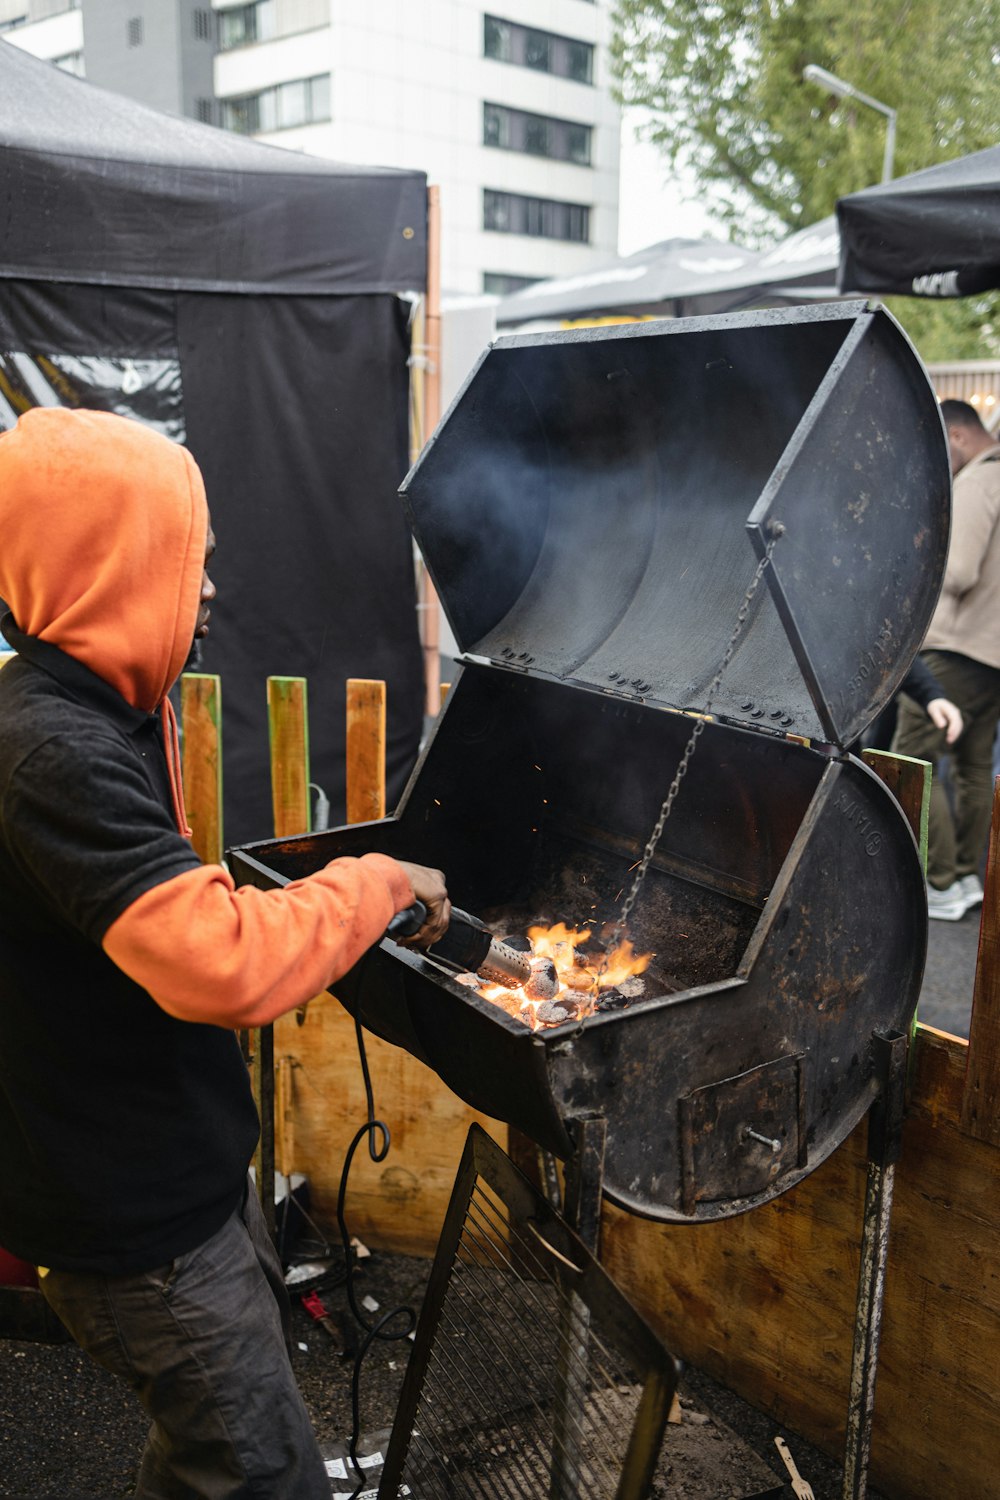 a person in a hoodie grilling food on a grill